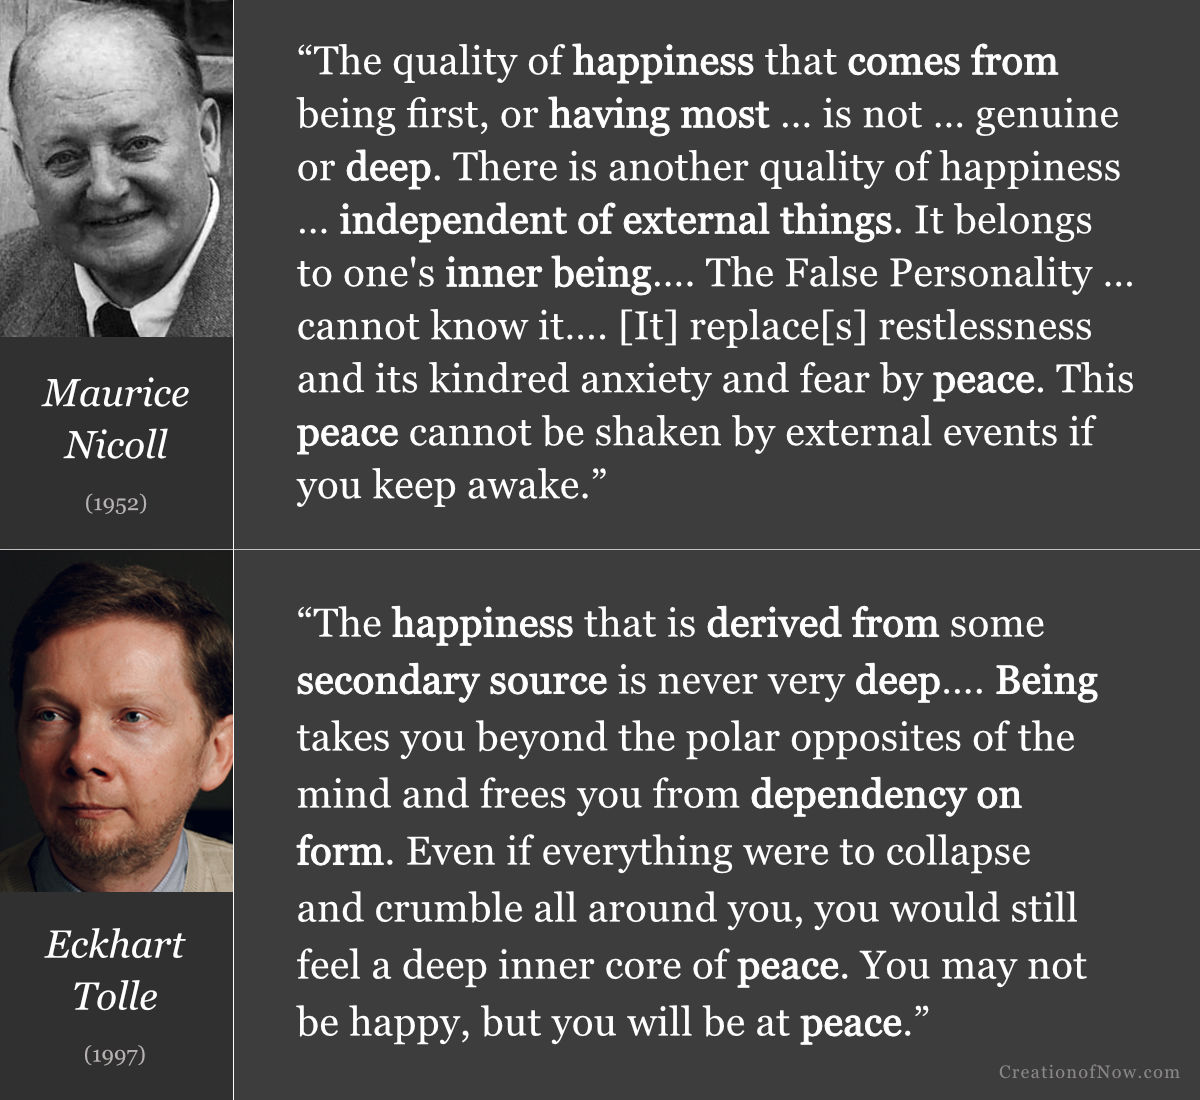 Maurice Nicoll and Eckhart Tolle quotes about true happiness and peace